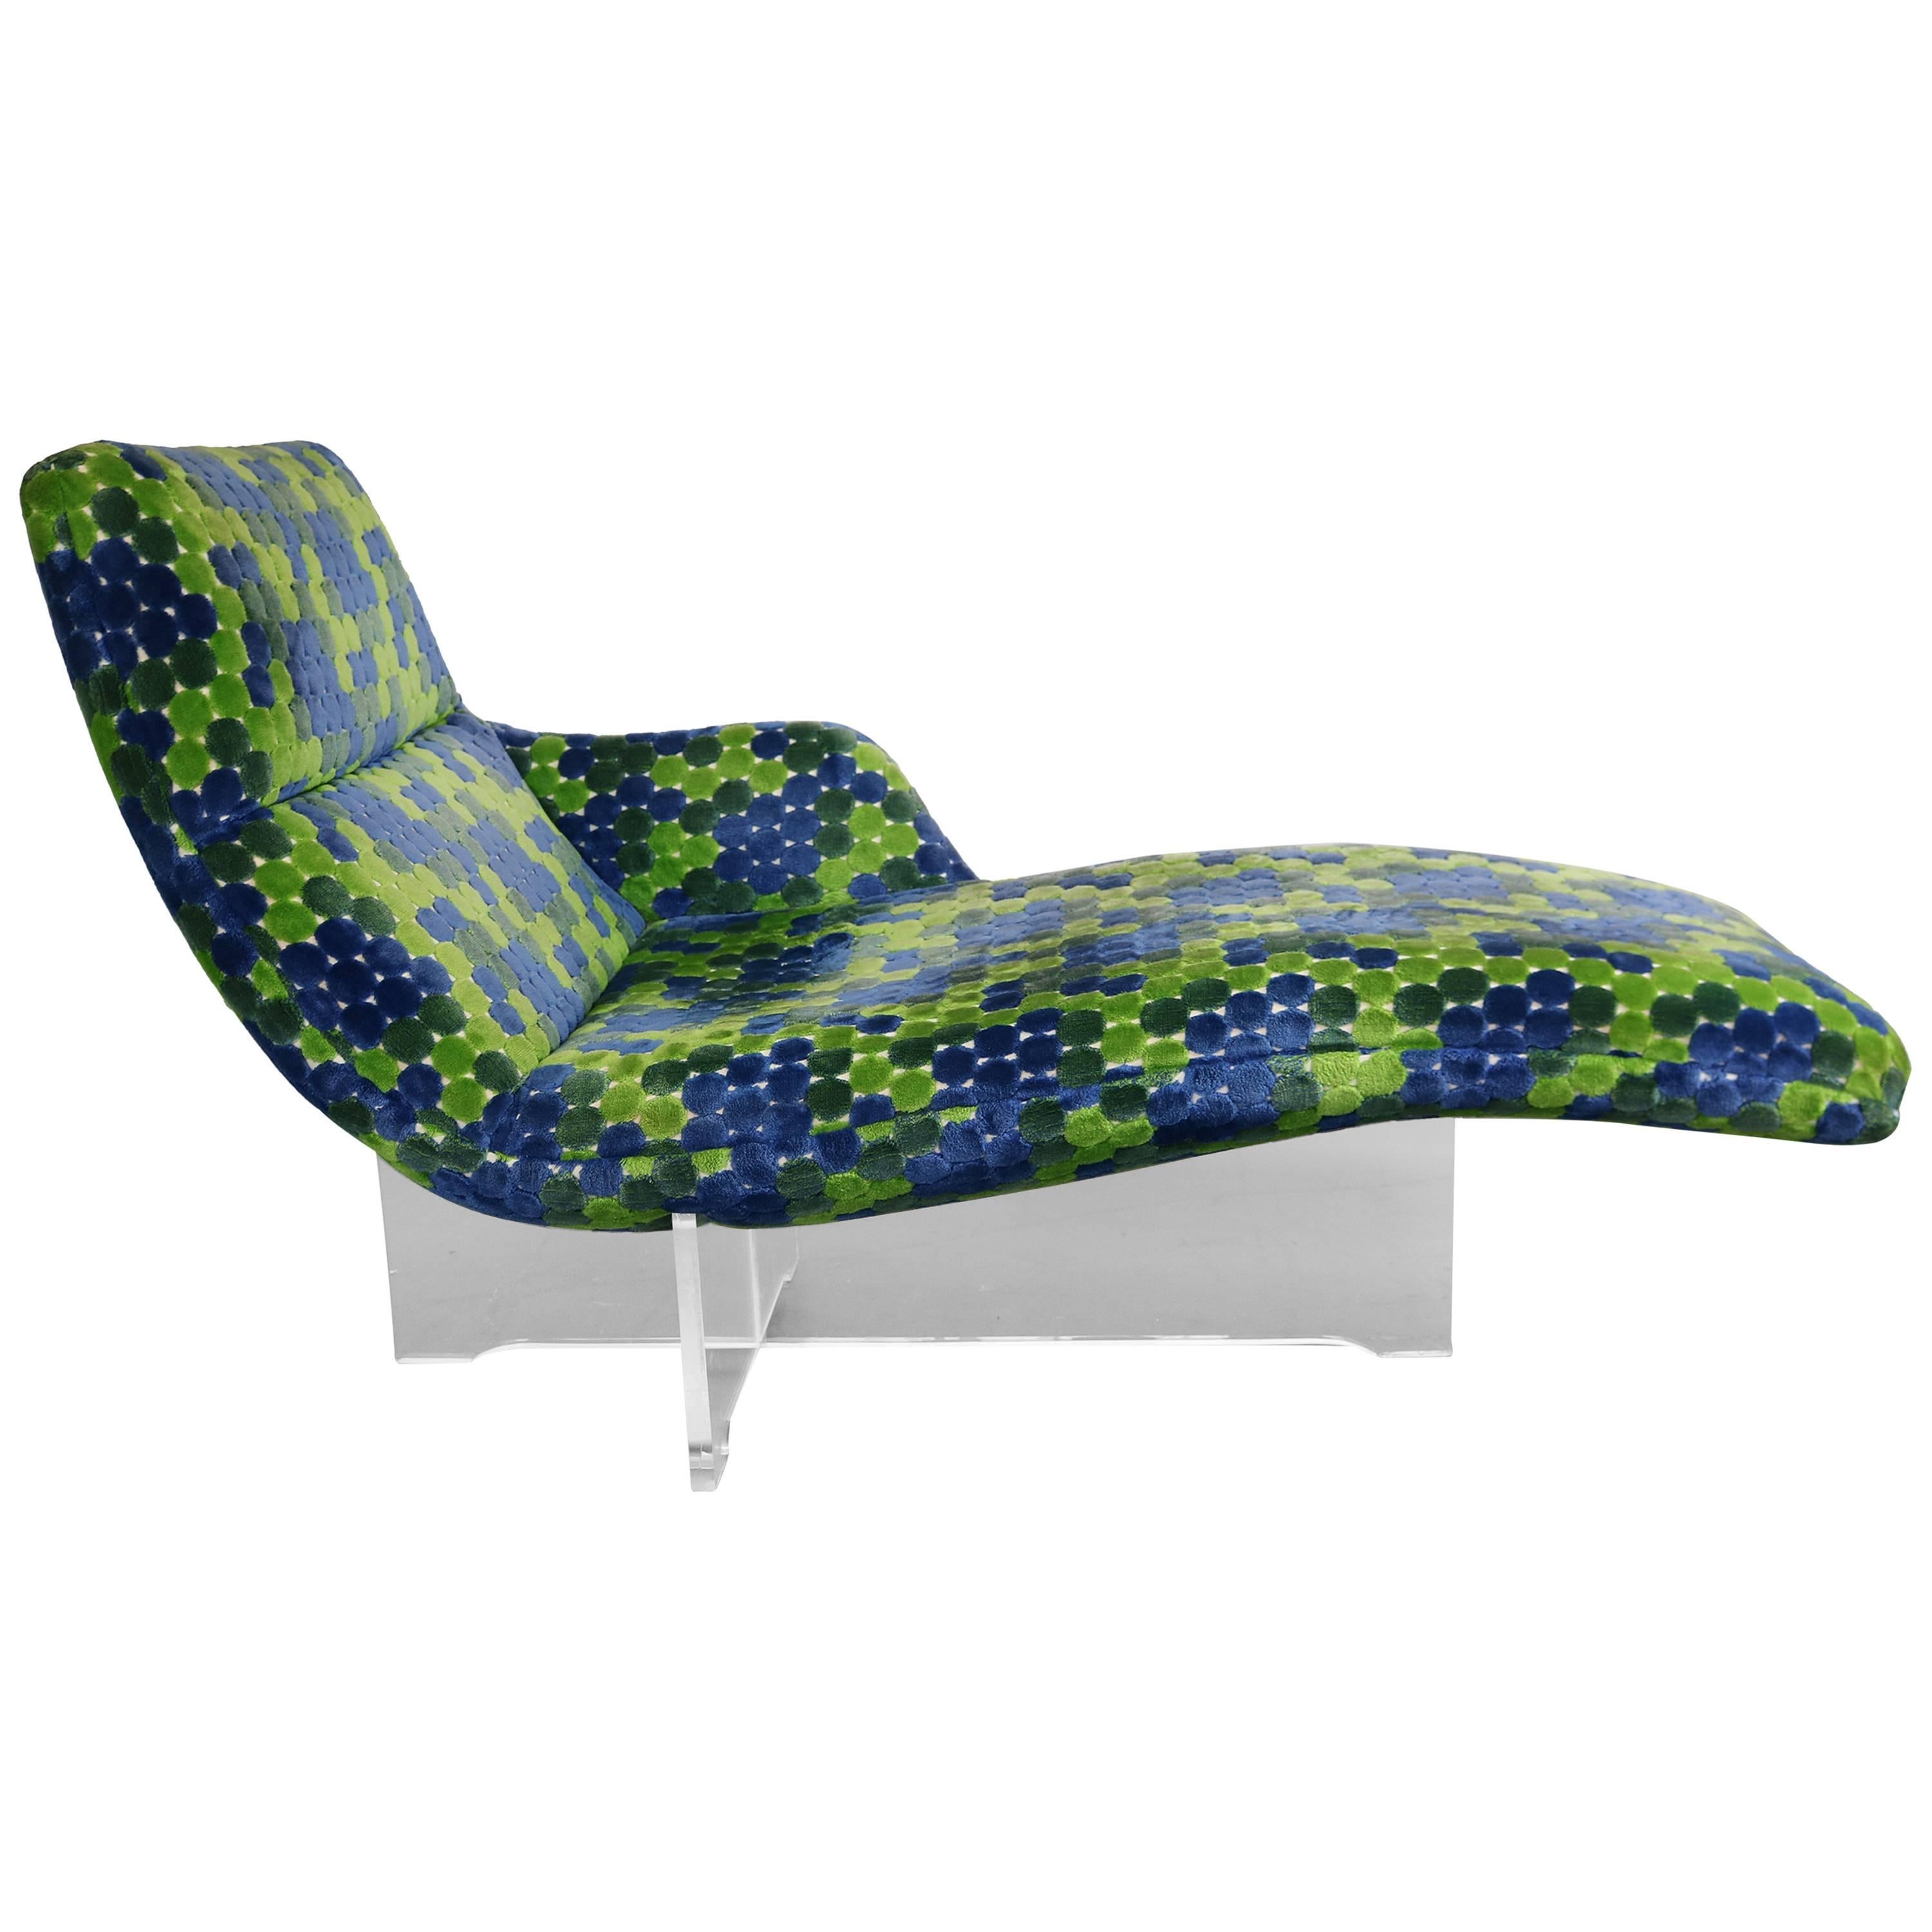 Vladimir Kagan Erica Lounge Chair Chaise with Lucite Base and Original Fabric